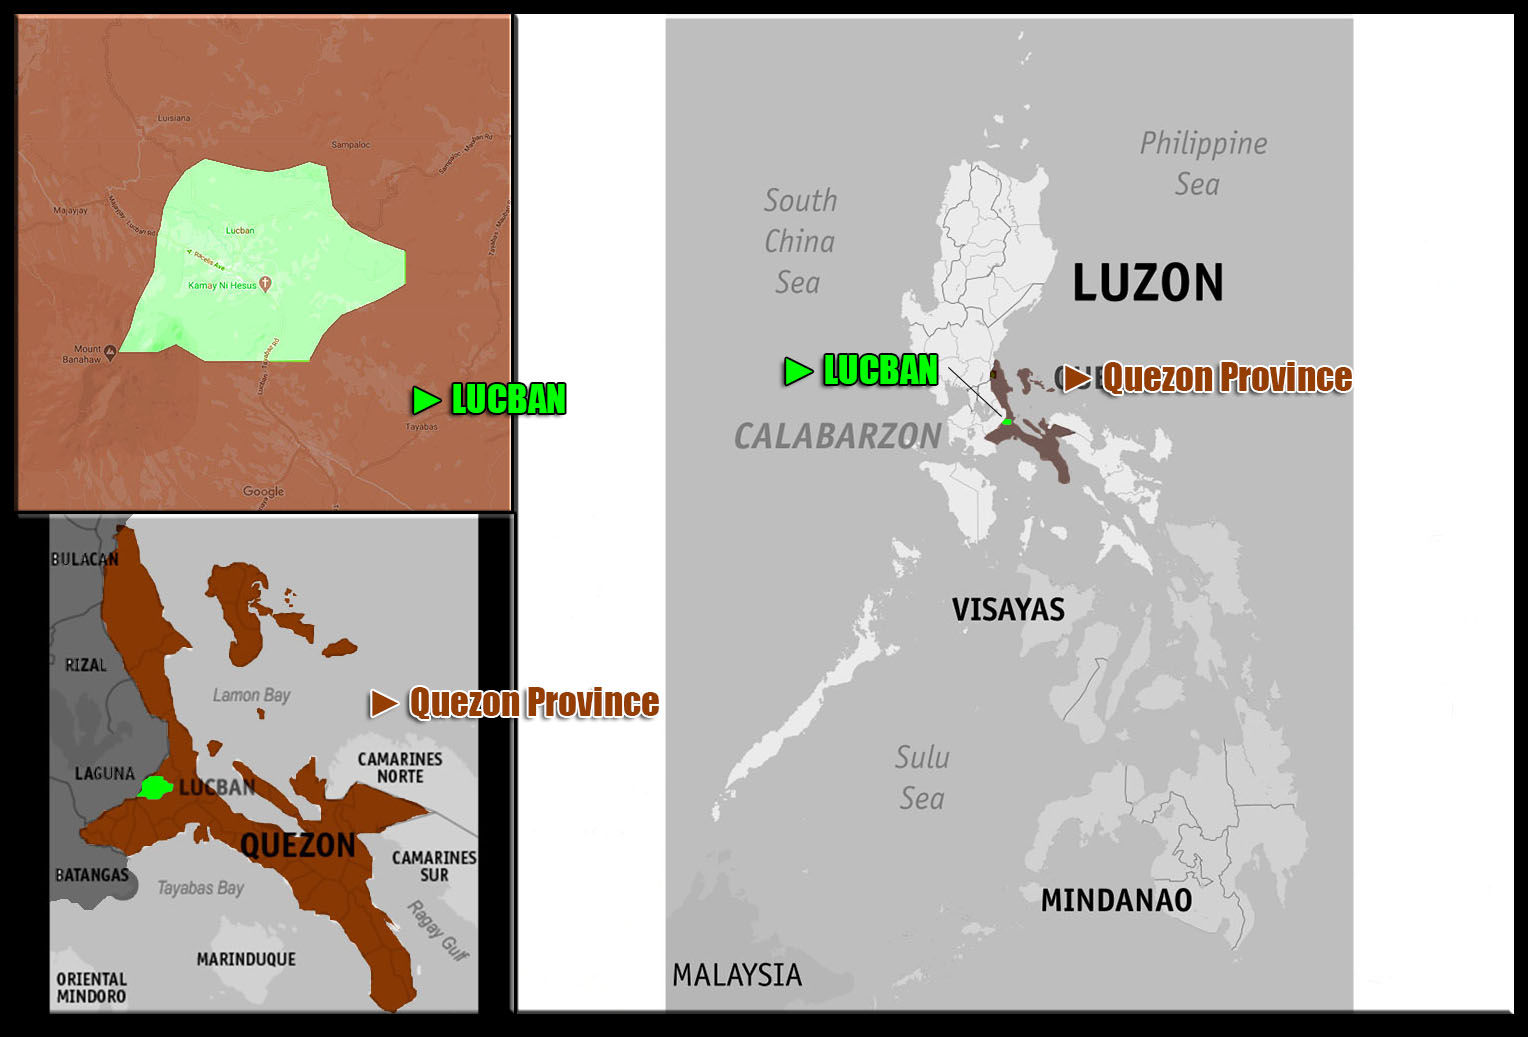 MAP OF LUCBAN